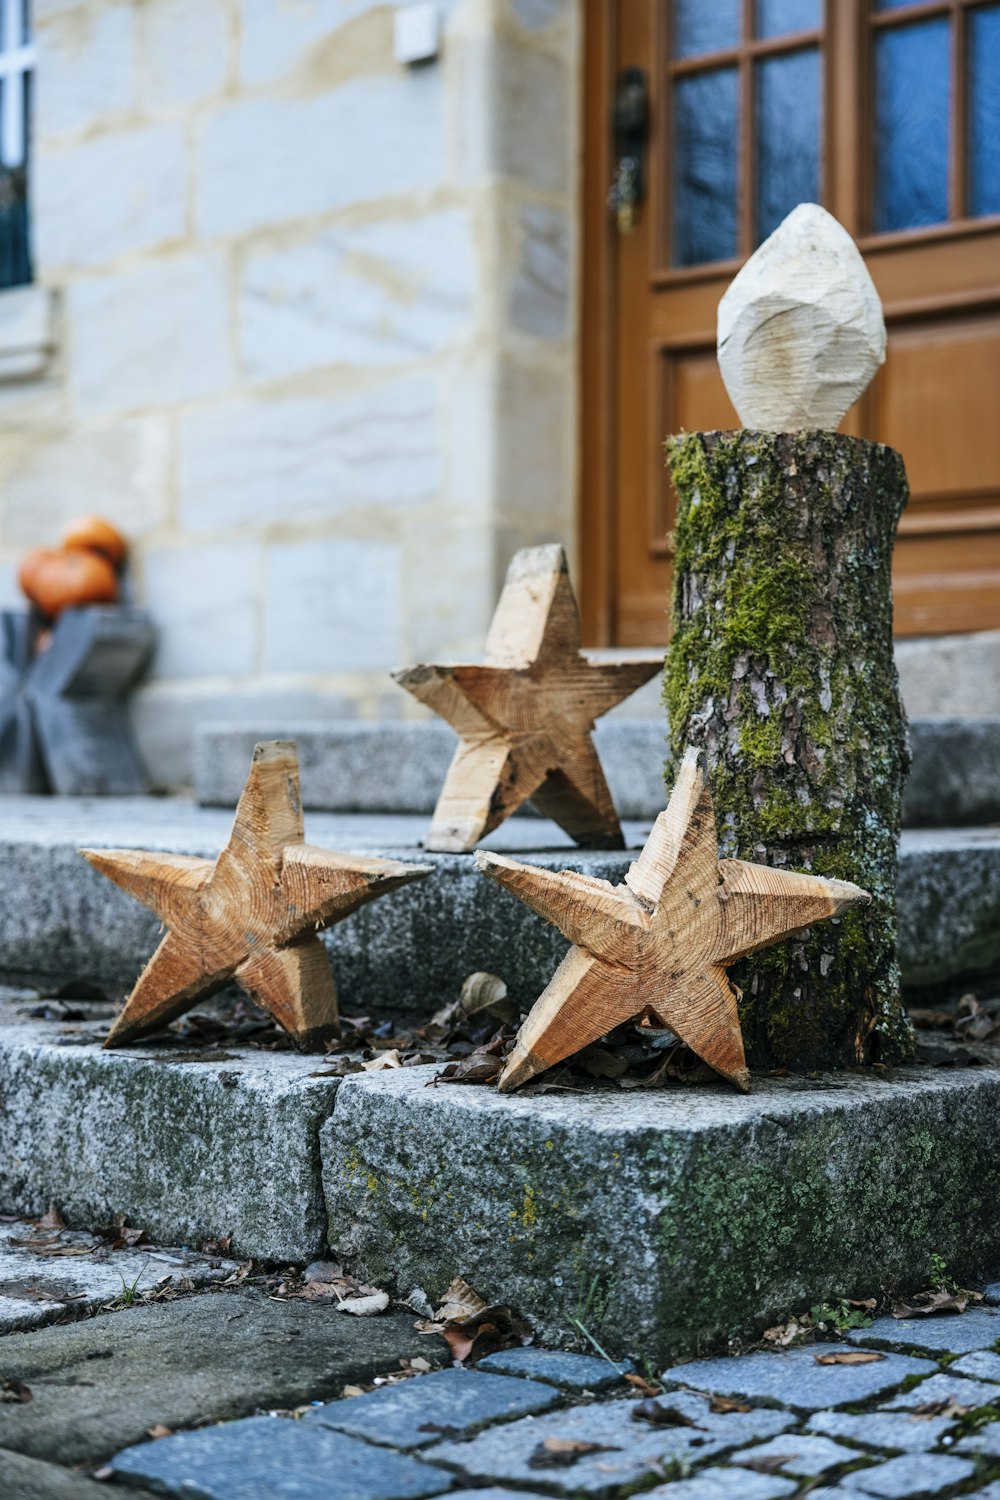 three wooden stars are placed next to a tree stump